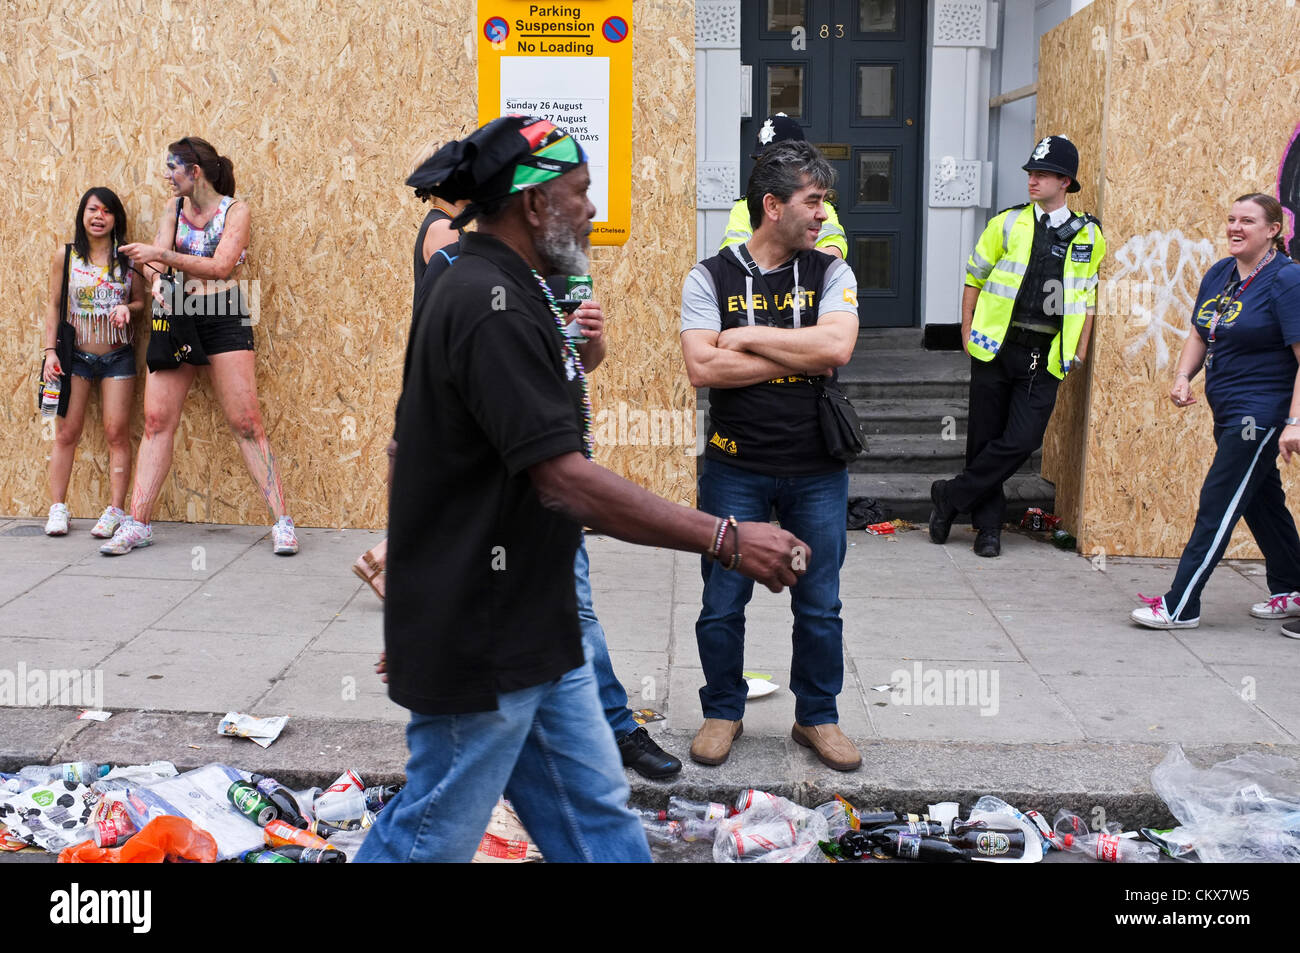 26th Aug 2012. London, UK.A scene on a garbage strewn street during the ...